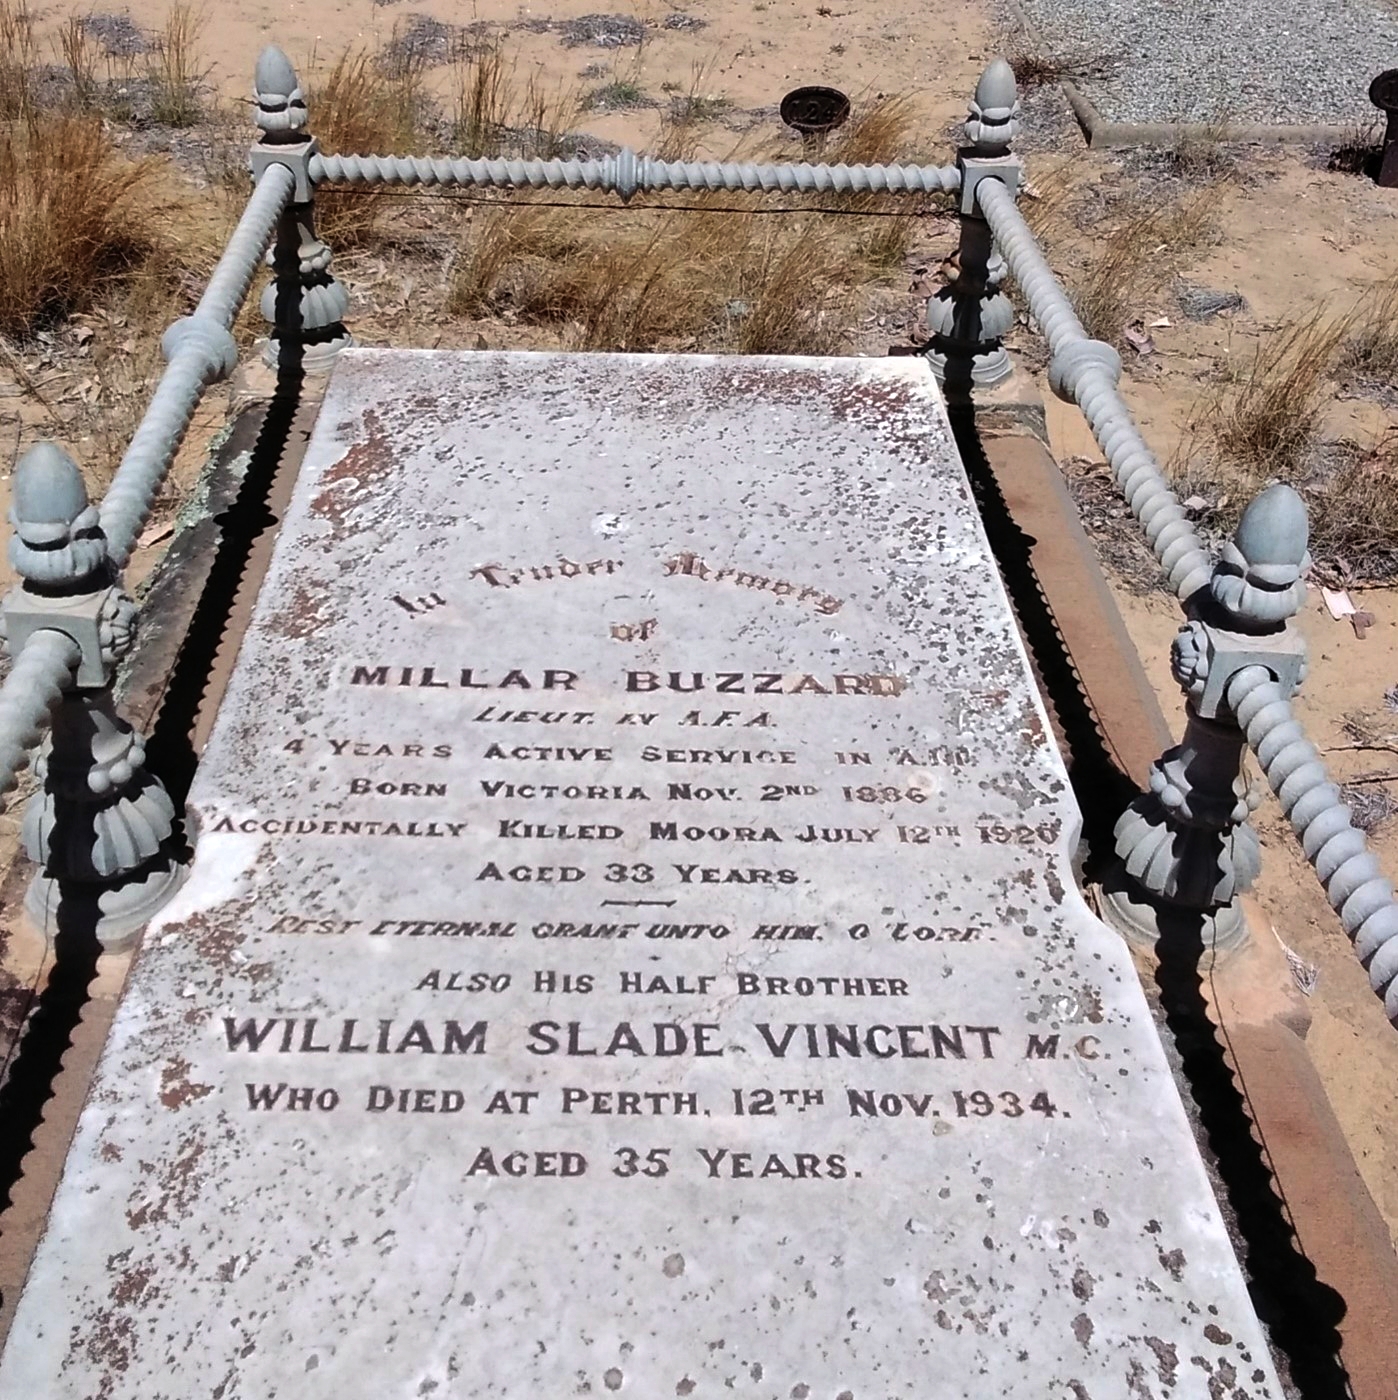 Memorial for Millar Buzzrd and William Slade Vincent